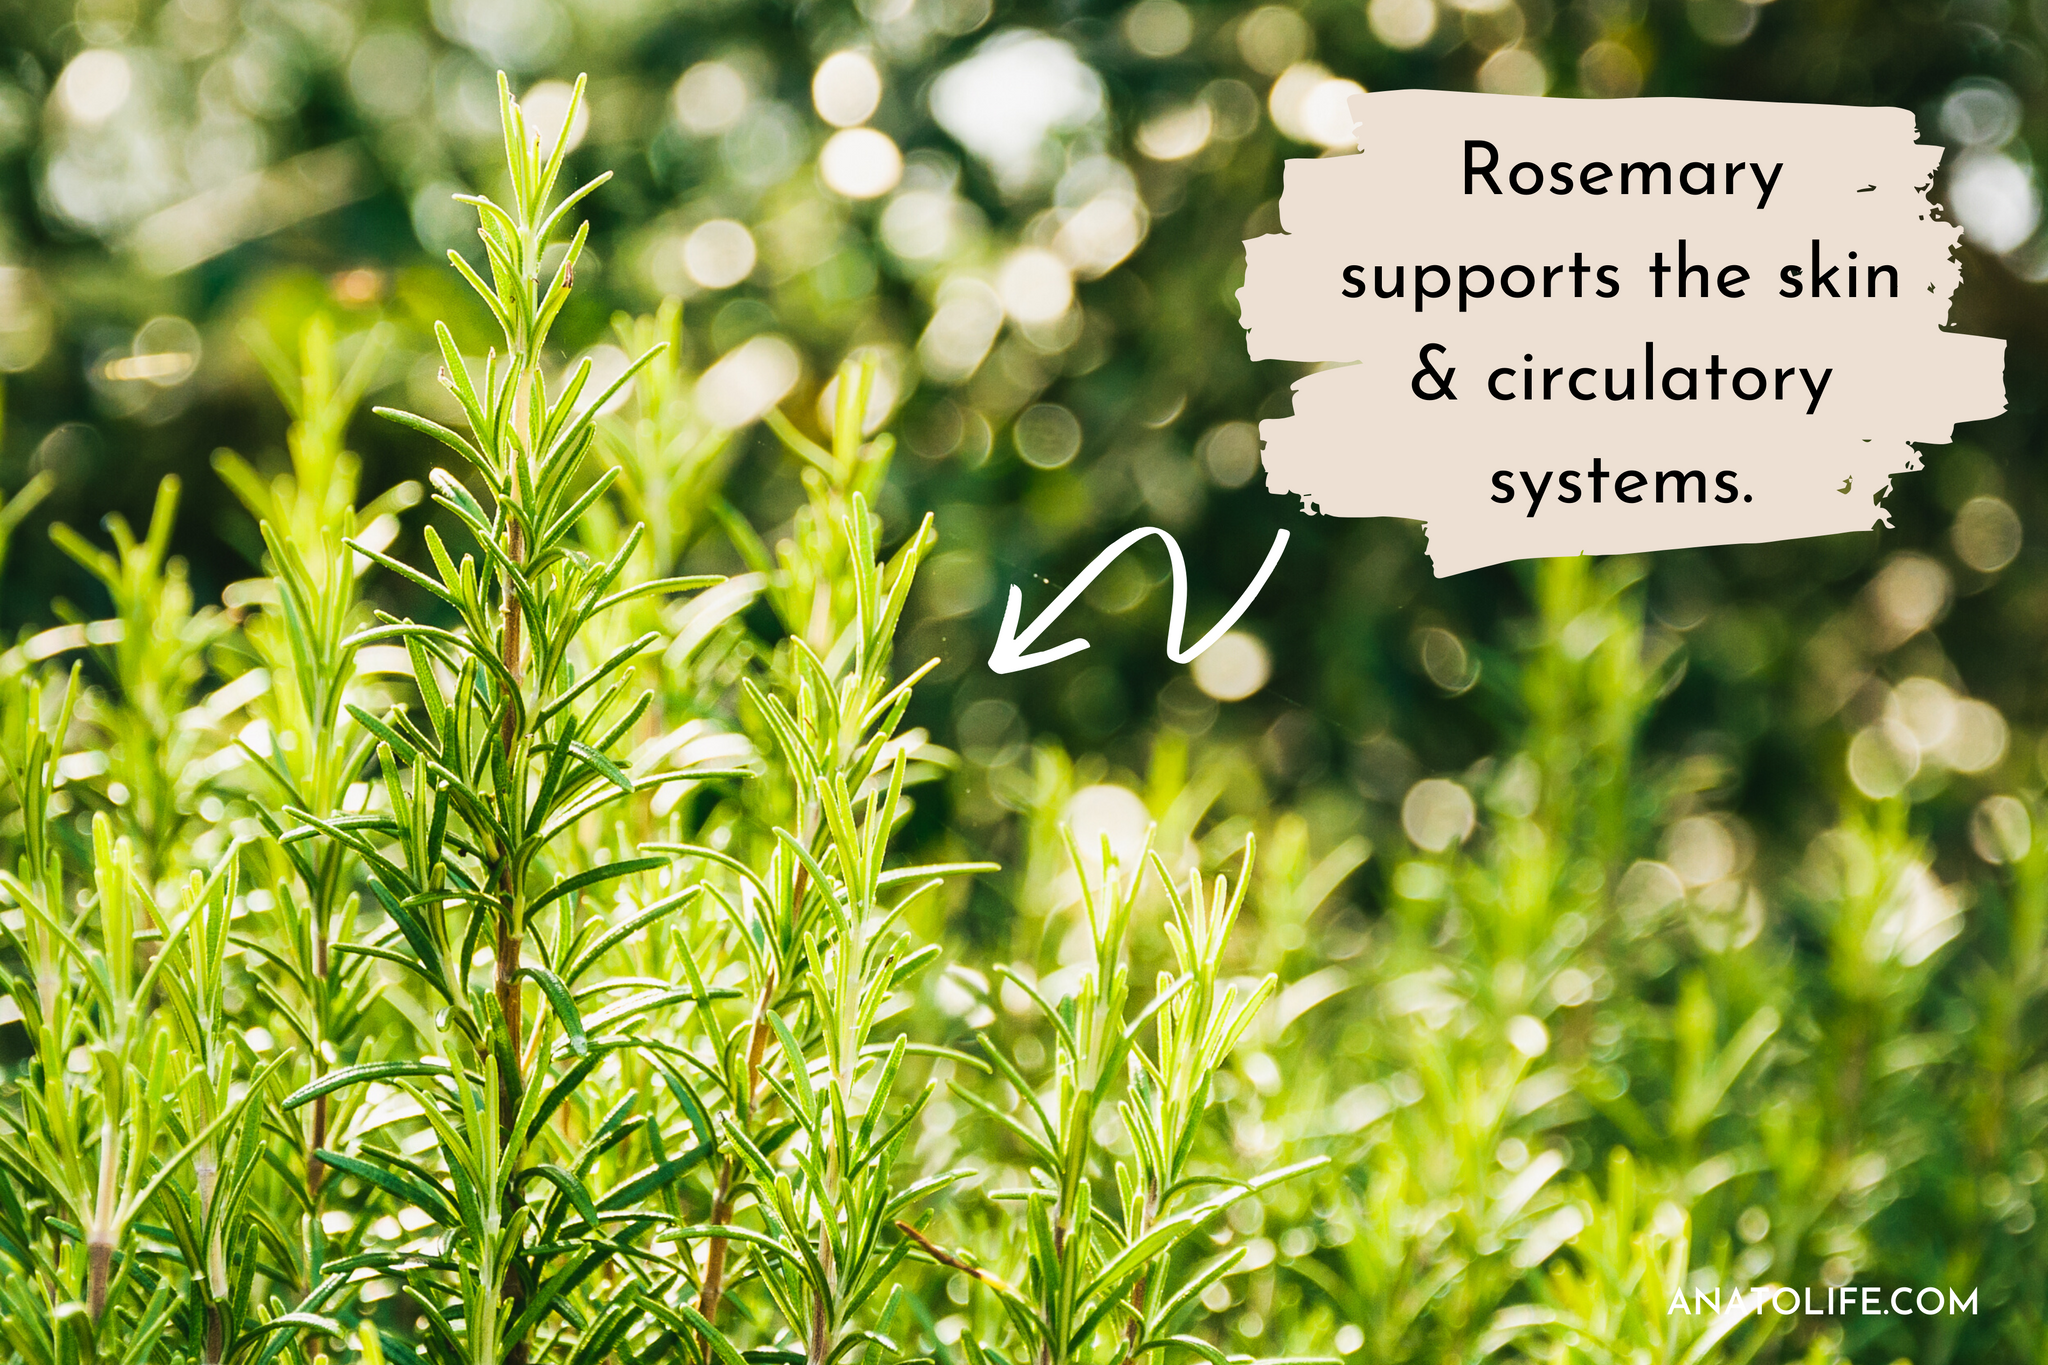 Rosemary supports the skin & circulatory systems